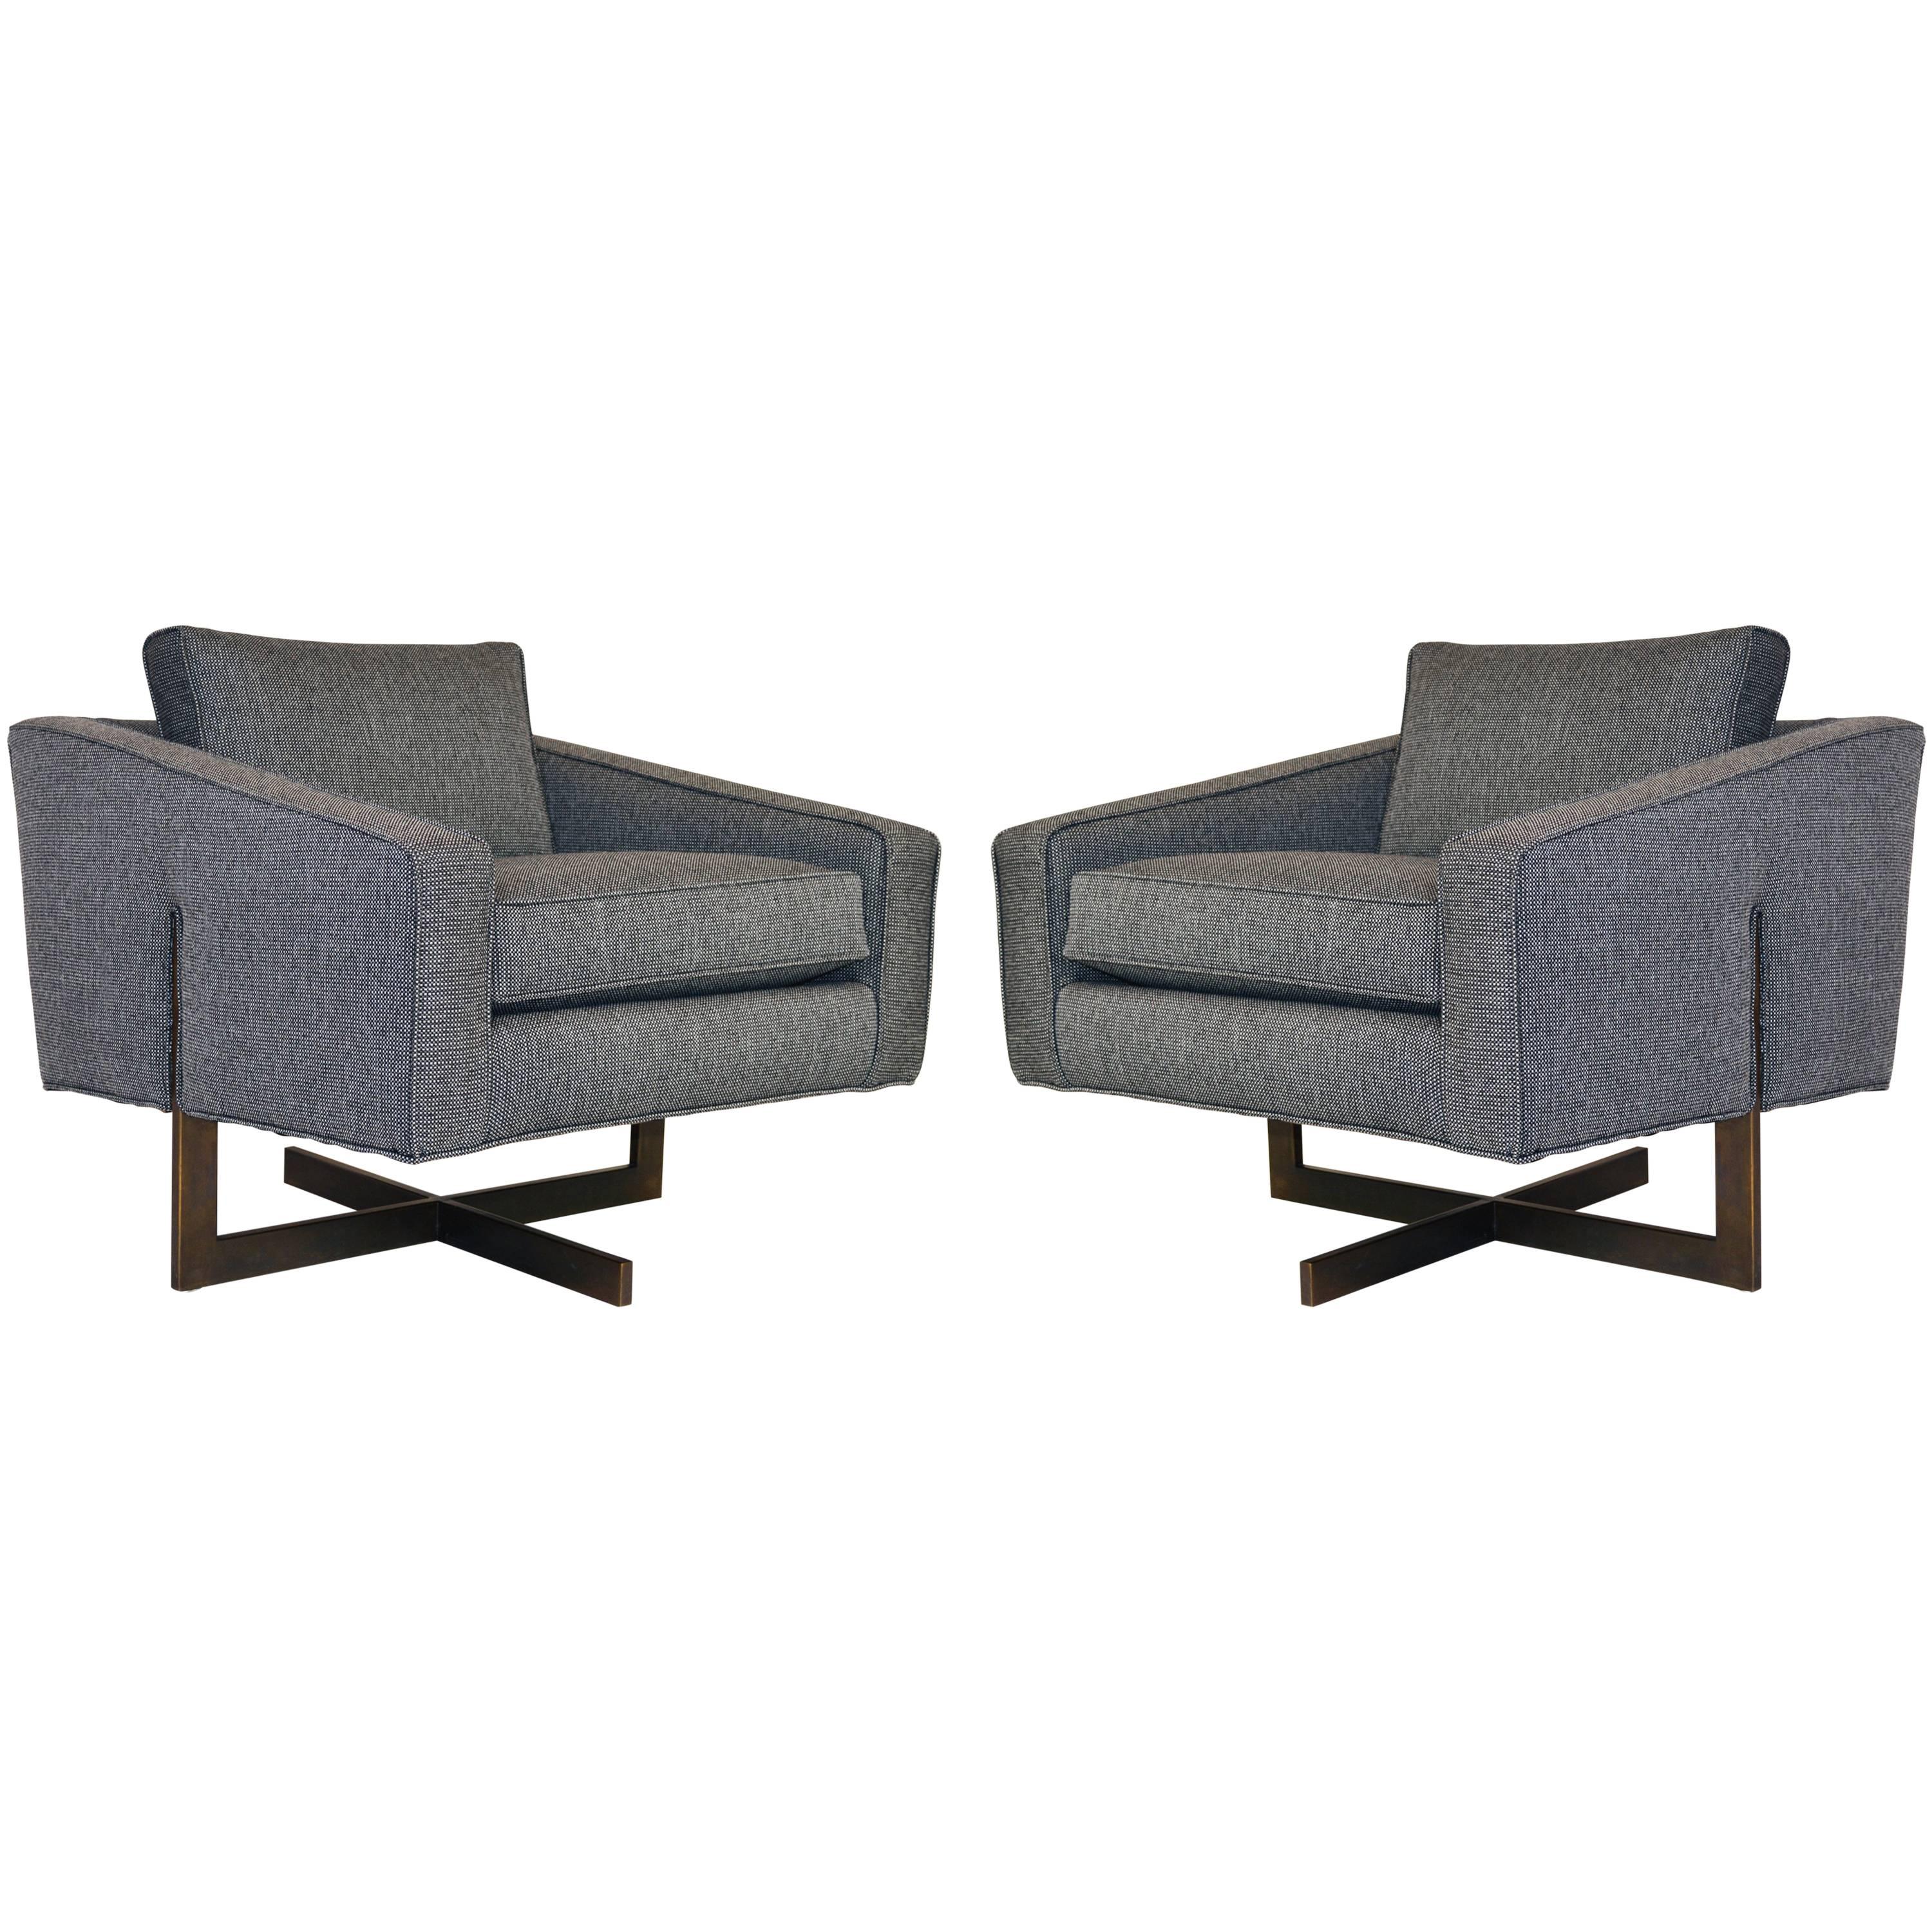 Pair of Mid-Century Modern Cantilever Chairs For Sale